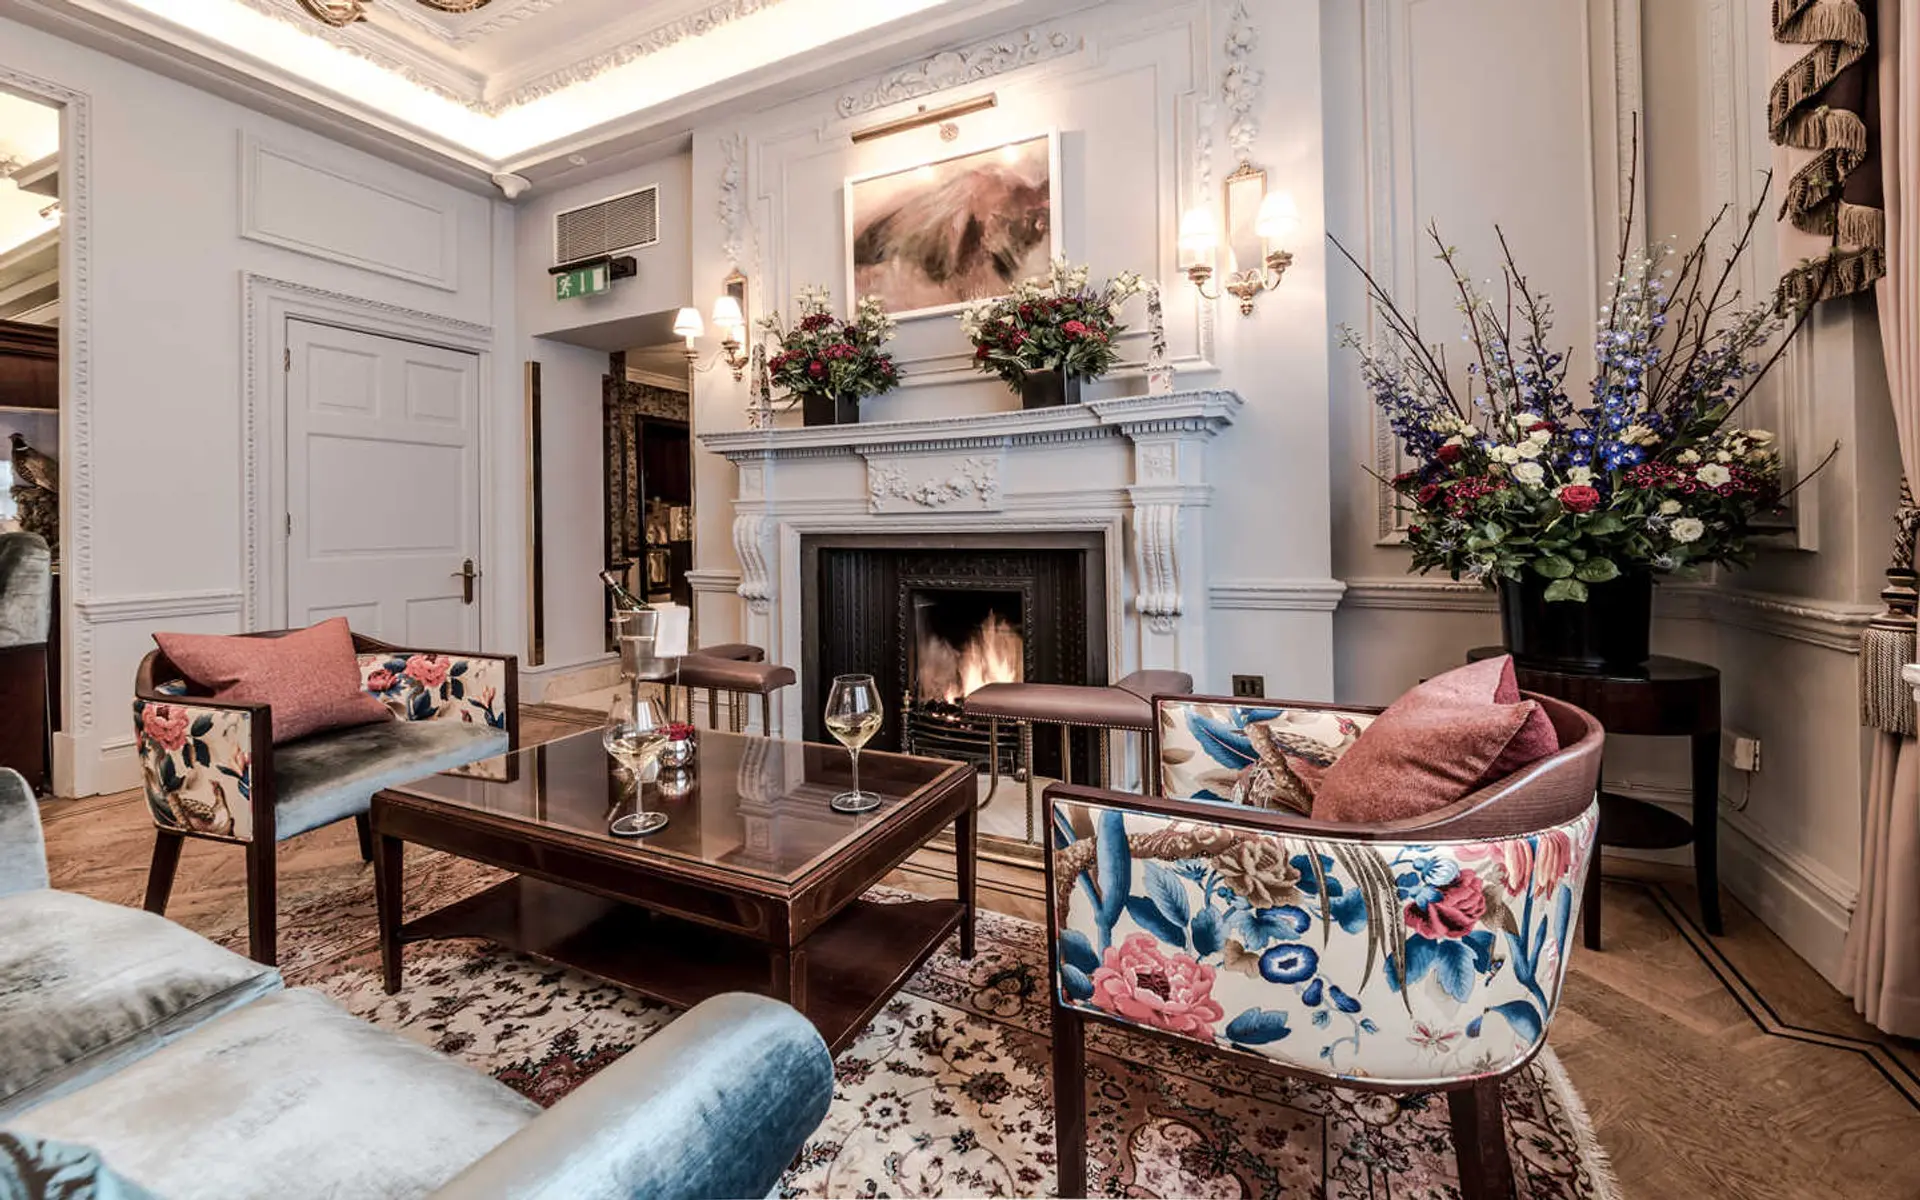 Hotel review Style' - The Stafford London - 1